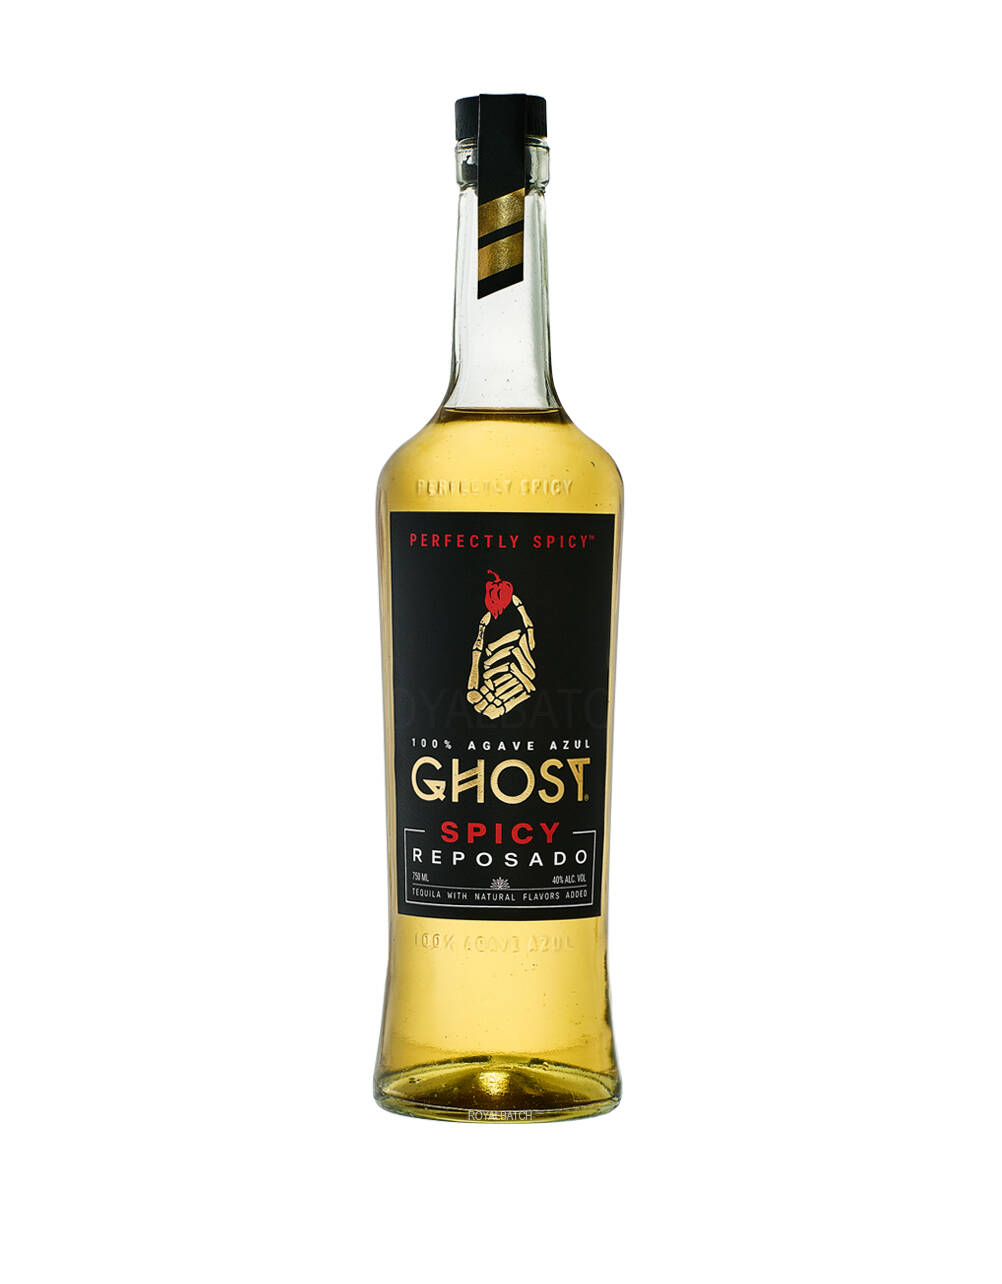 Ghost Spicy Reposado Tequila